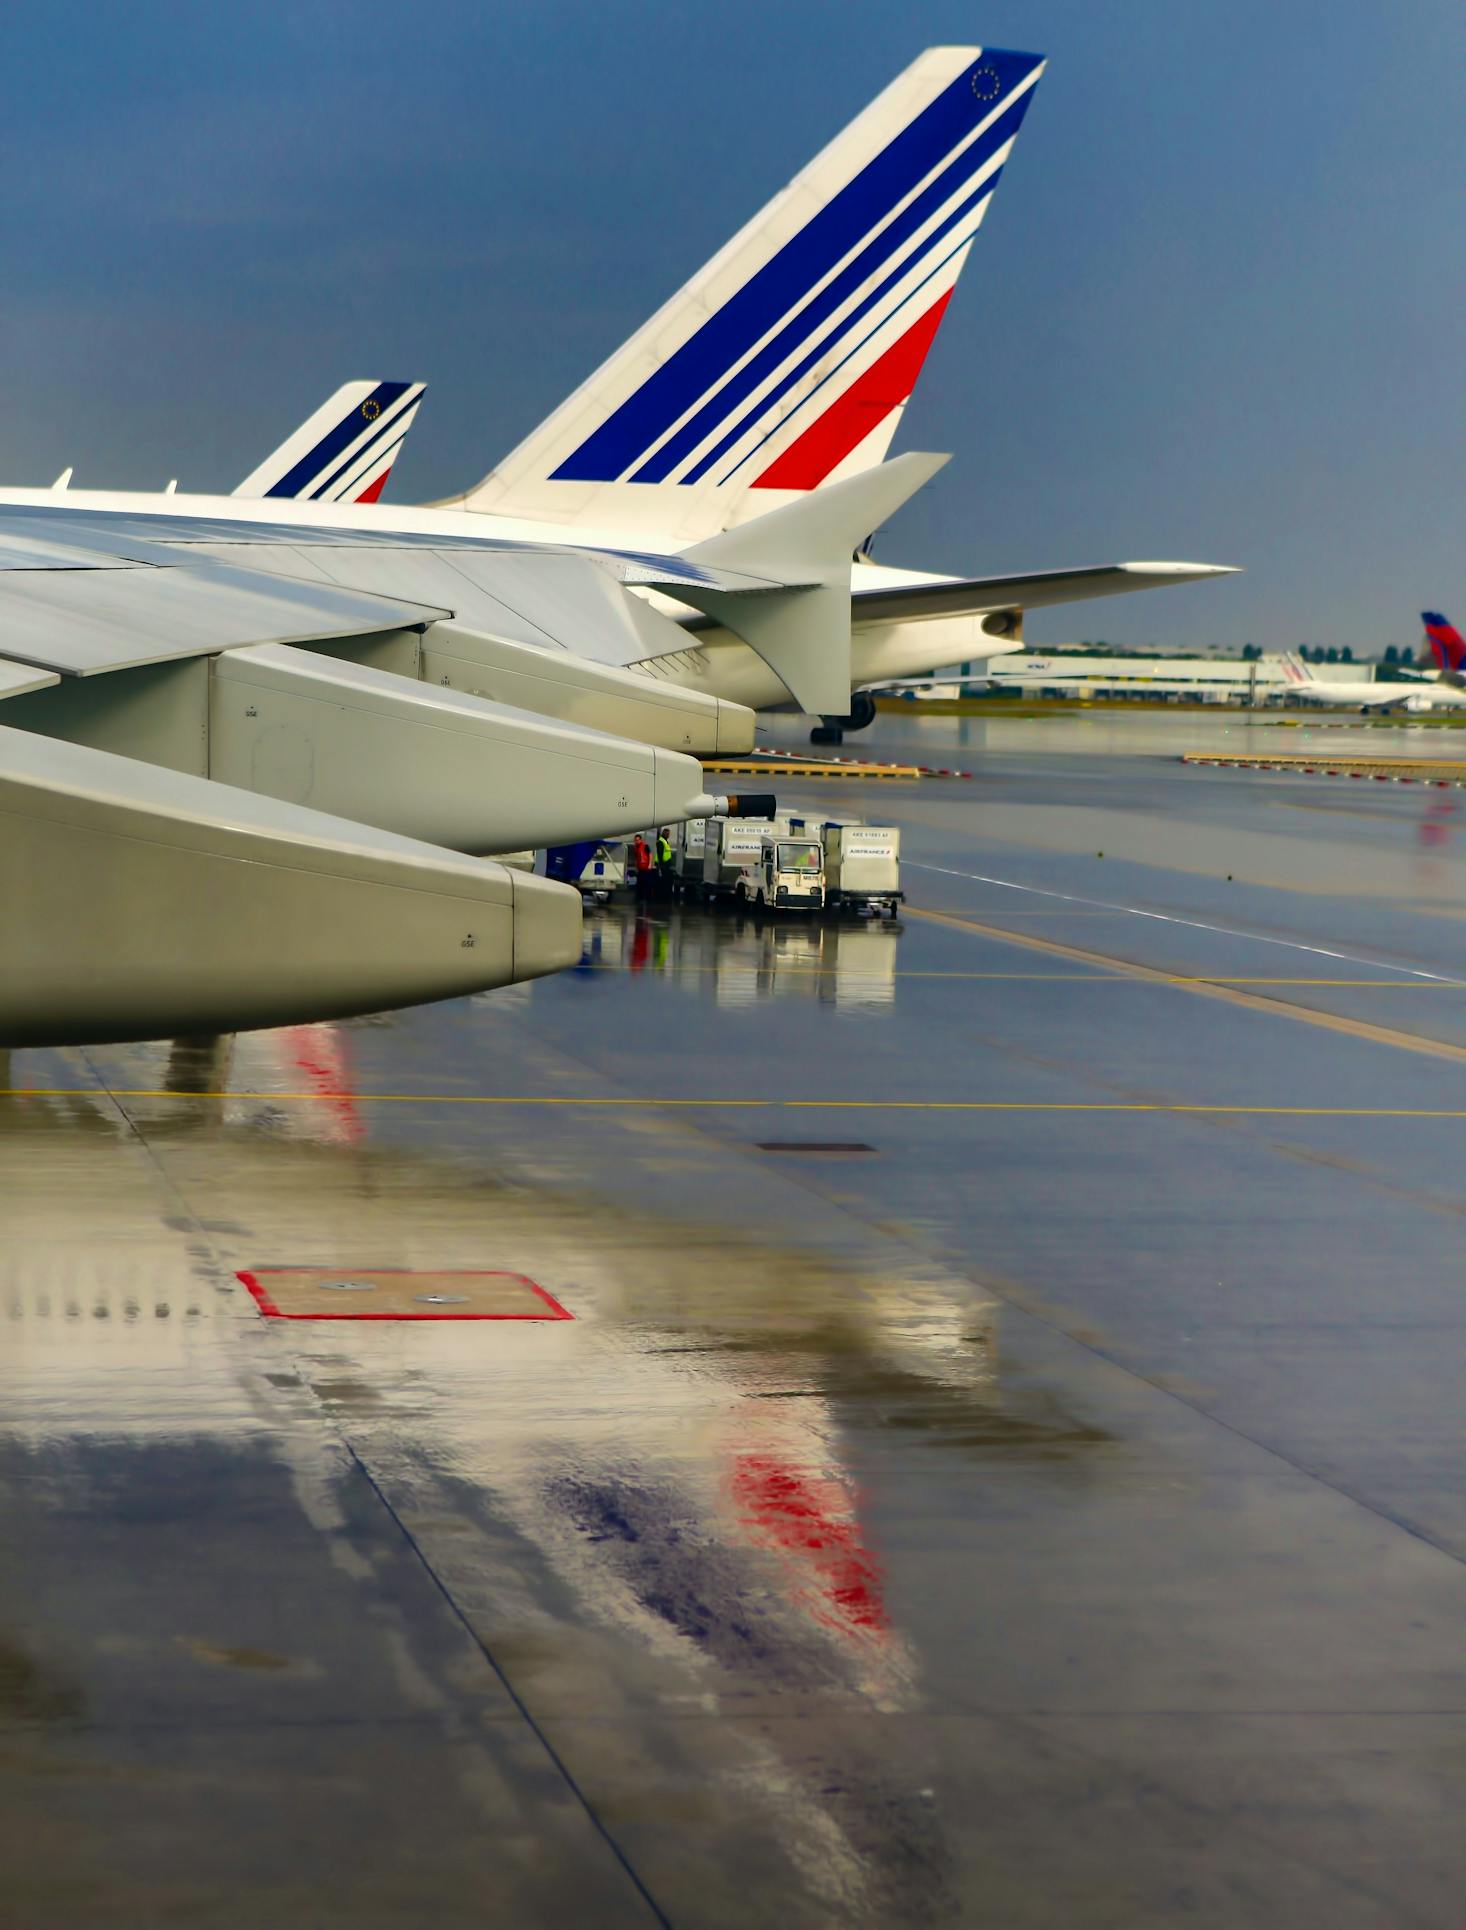 Planes on runway at Charles de Gaulle Airport